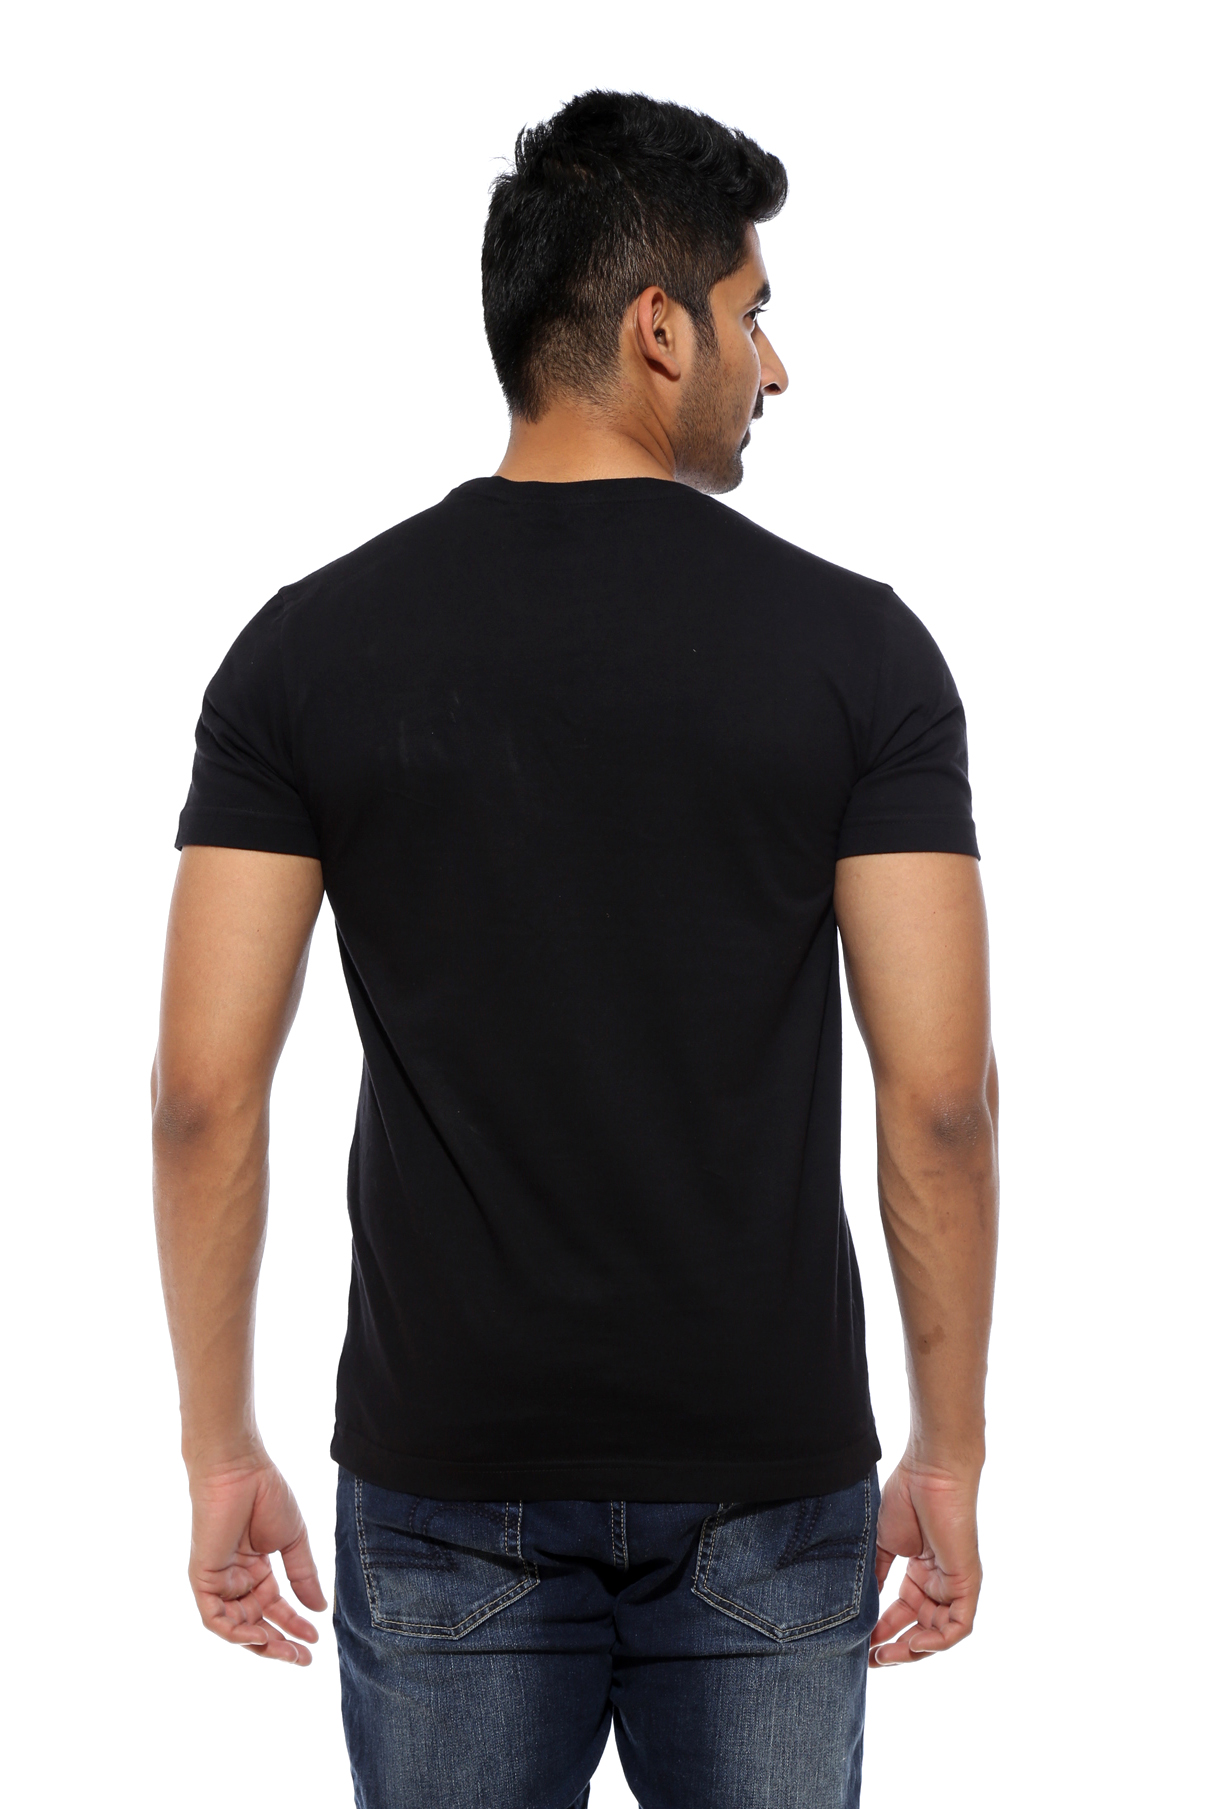 Buy Mufti Black Round Neck Half Sleeve Mens T-Shirts Online @ ₹499 from ...